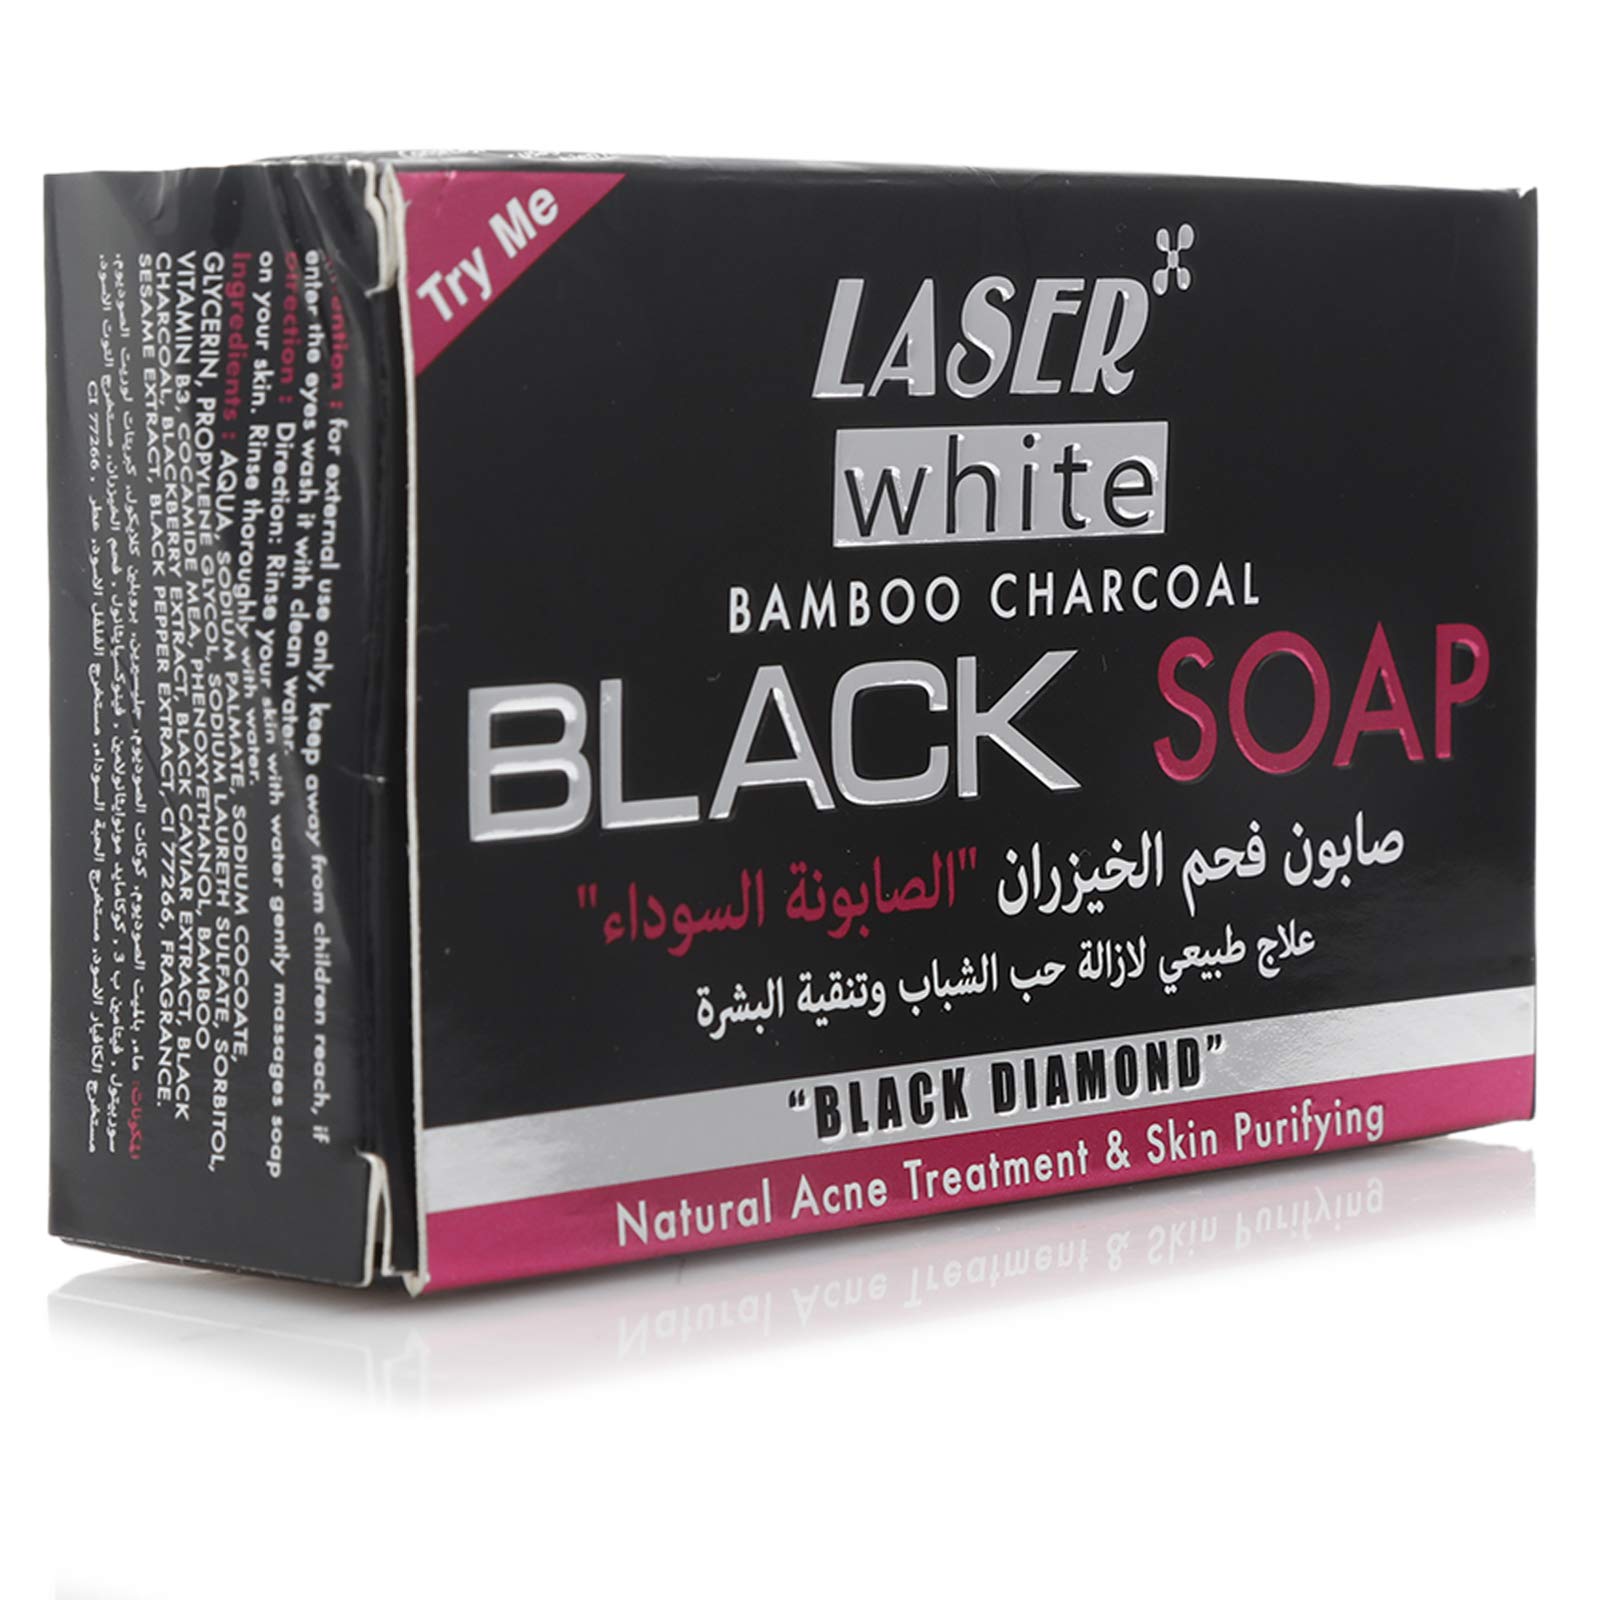 Laser White Bamboo Charcoal Black Soap